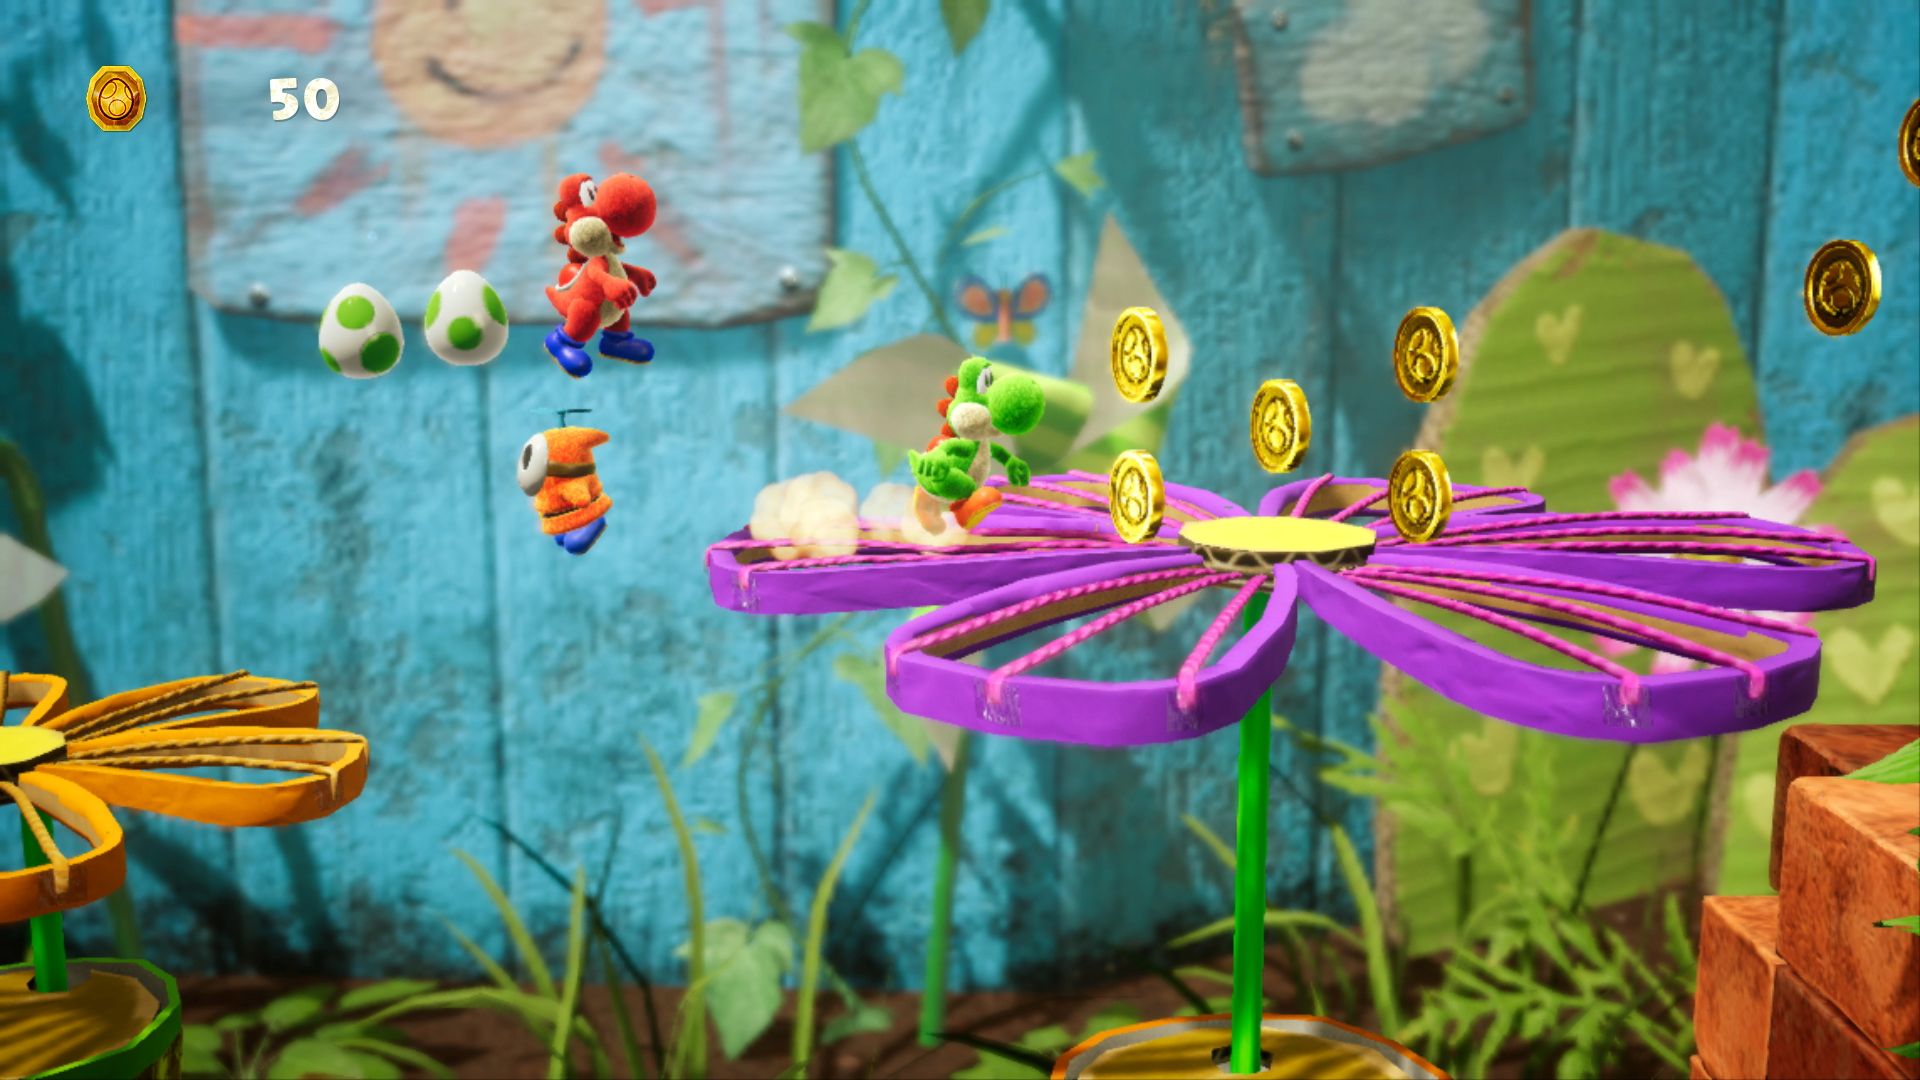 3D, Action, Good Feel, Nintendo, Nintendo Switch Review, Platformer, Rating 8/10, Switch Review, Yoshi’s Crafted World, Yoshi’s Crafted World Review